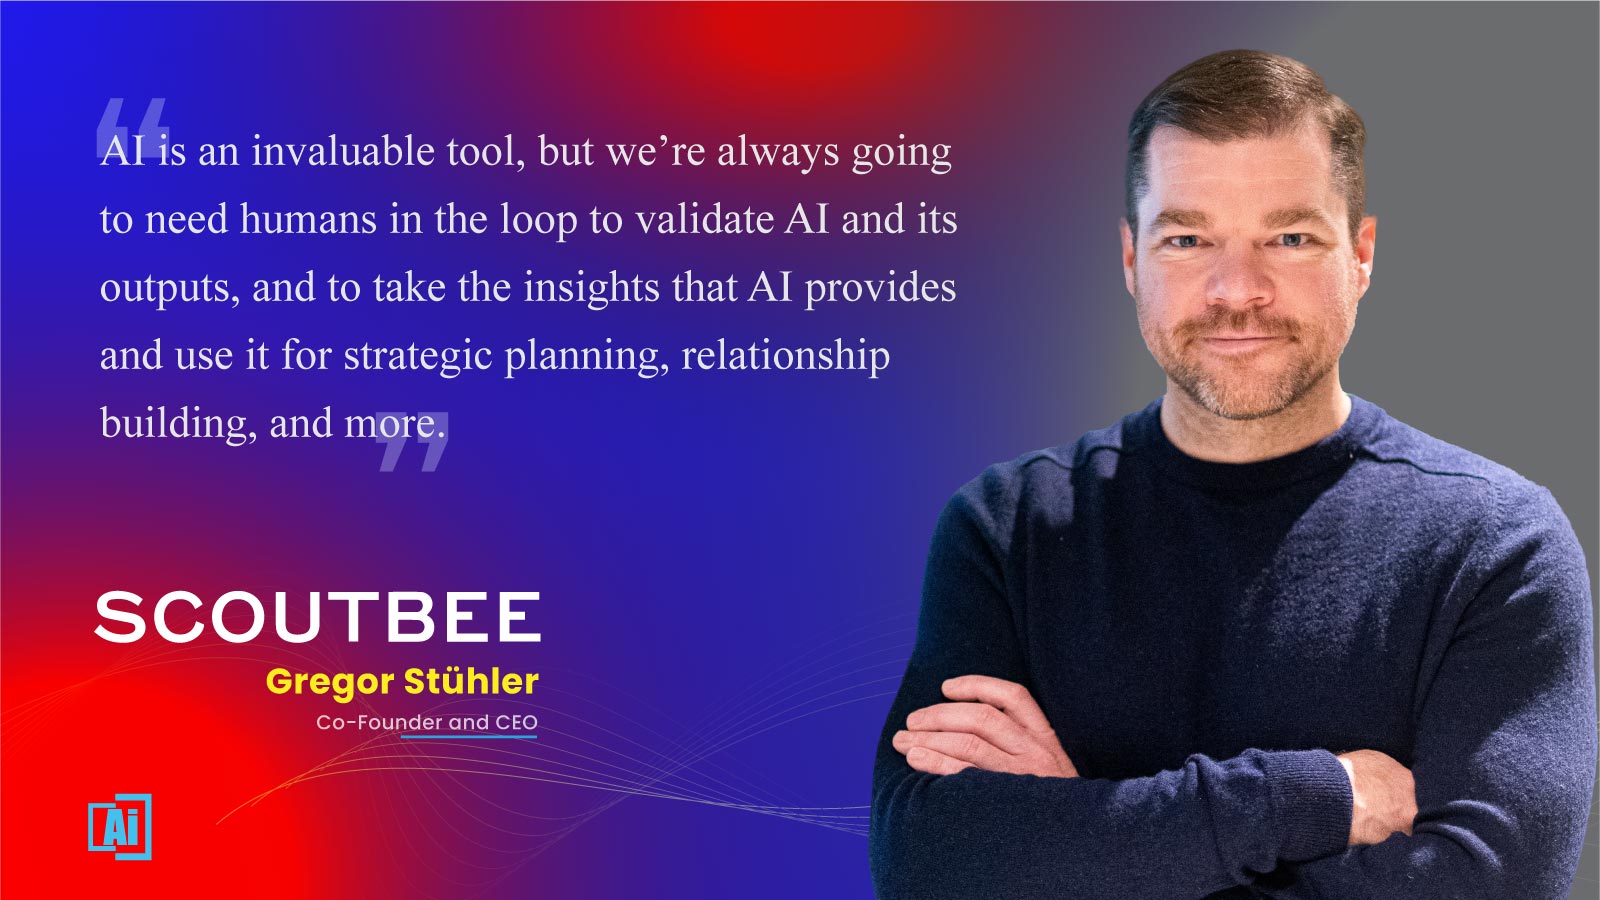 Gregor Stühler, Co-Founder and CEO at Scoutbee